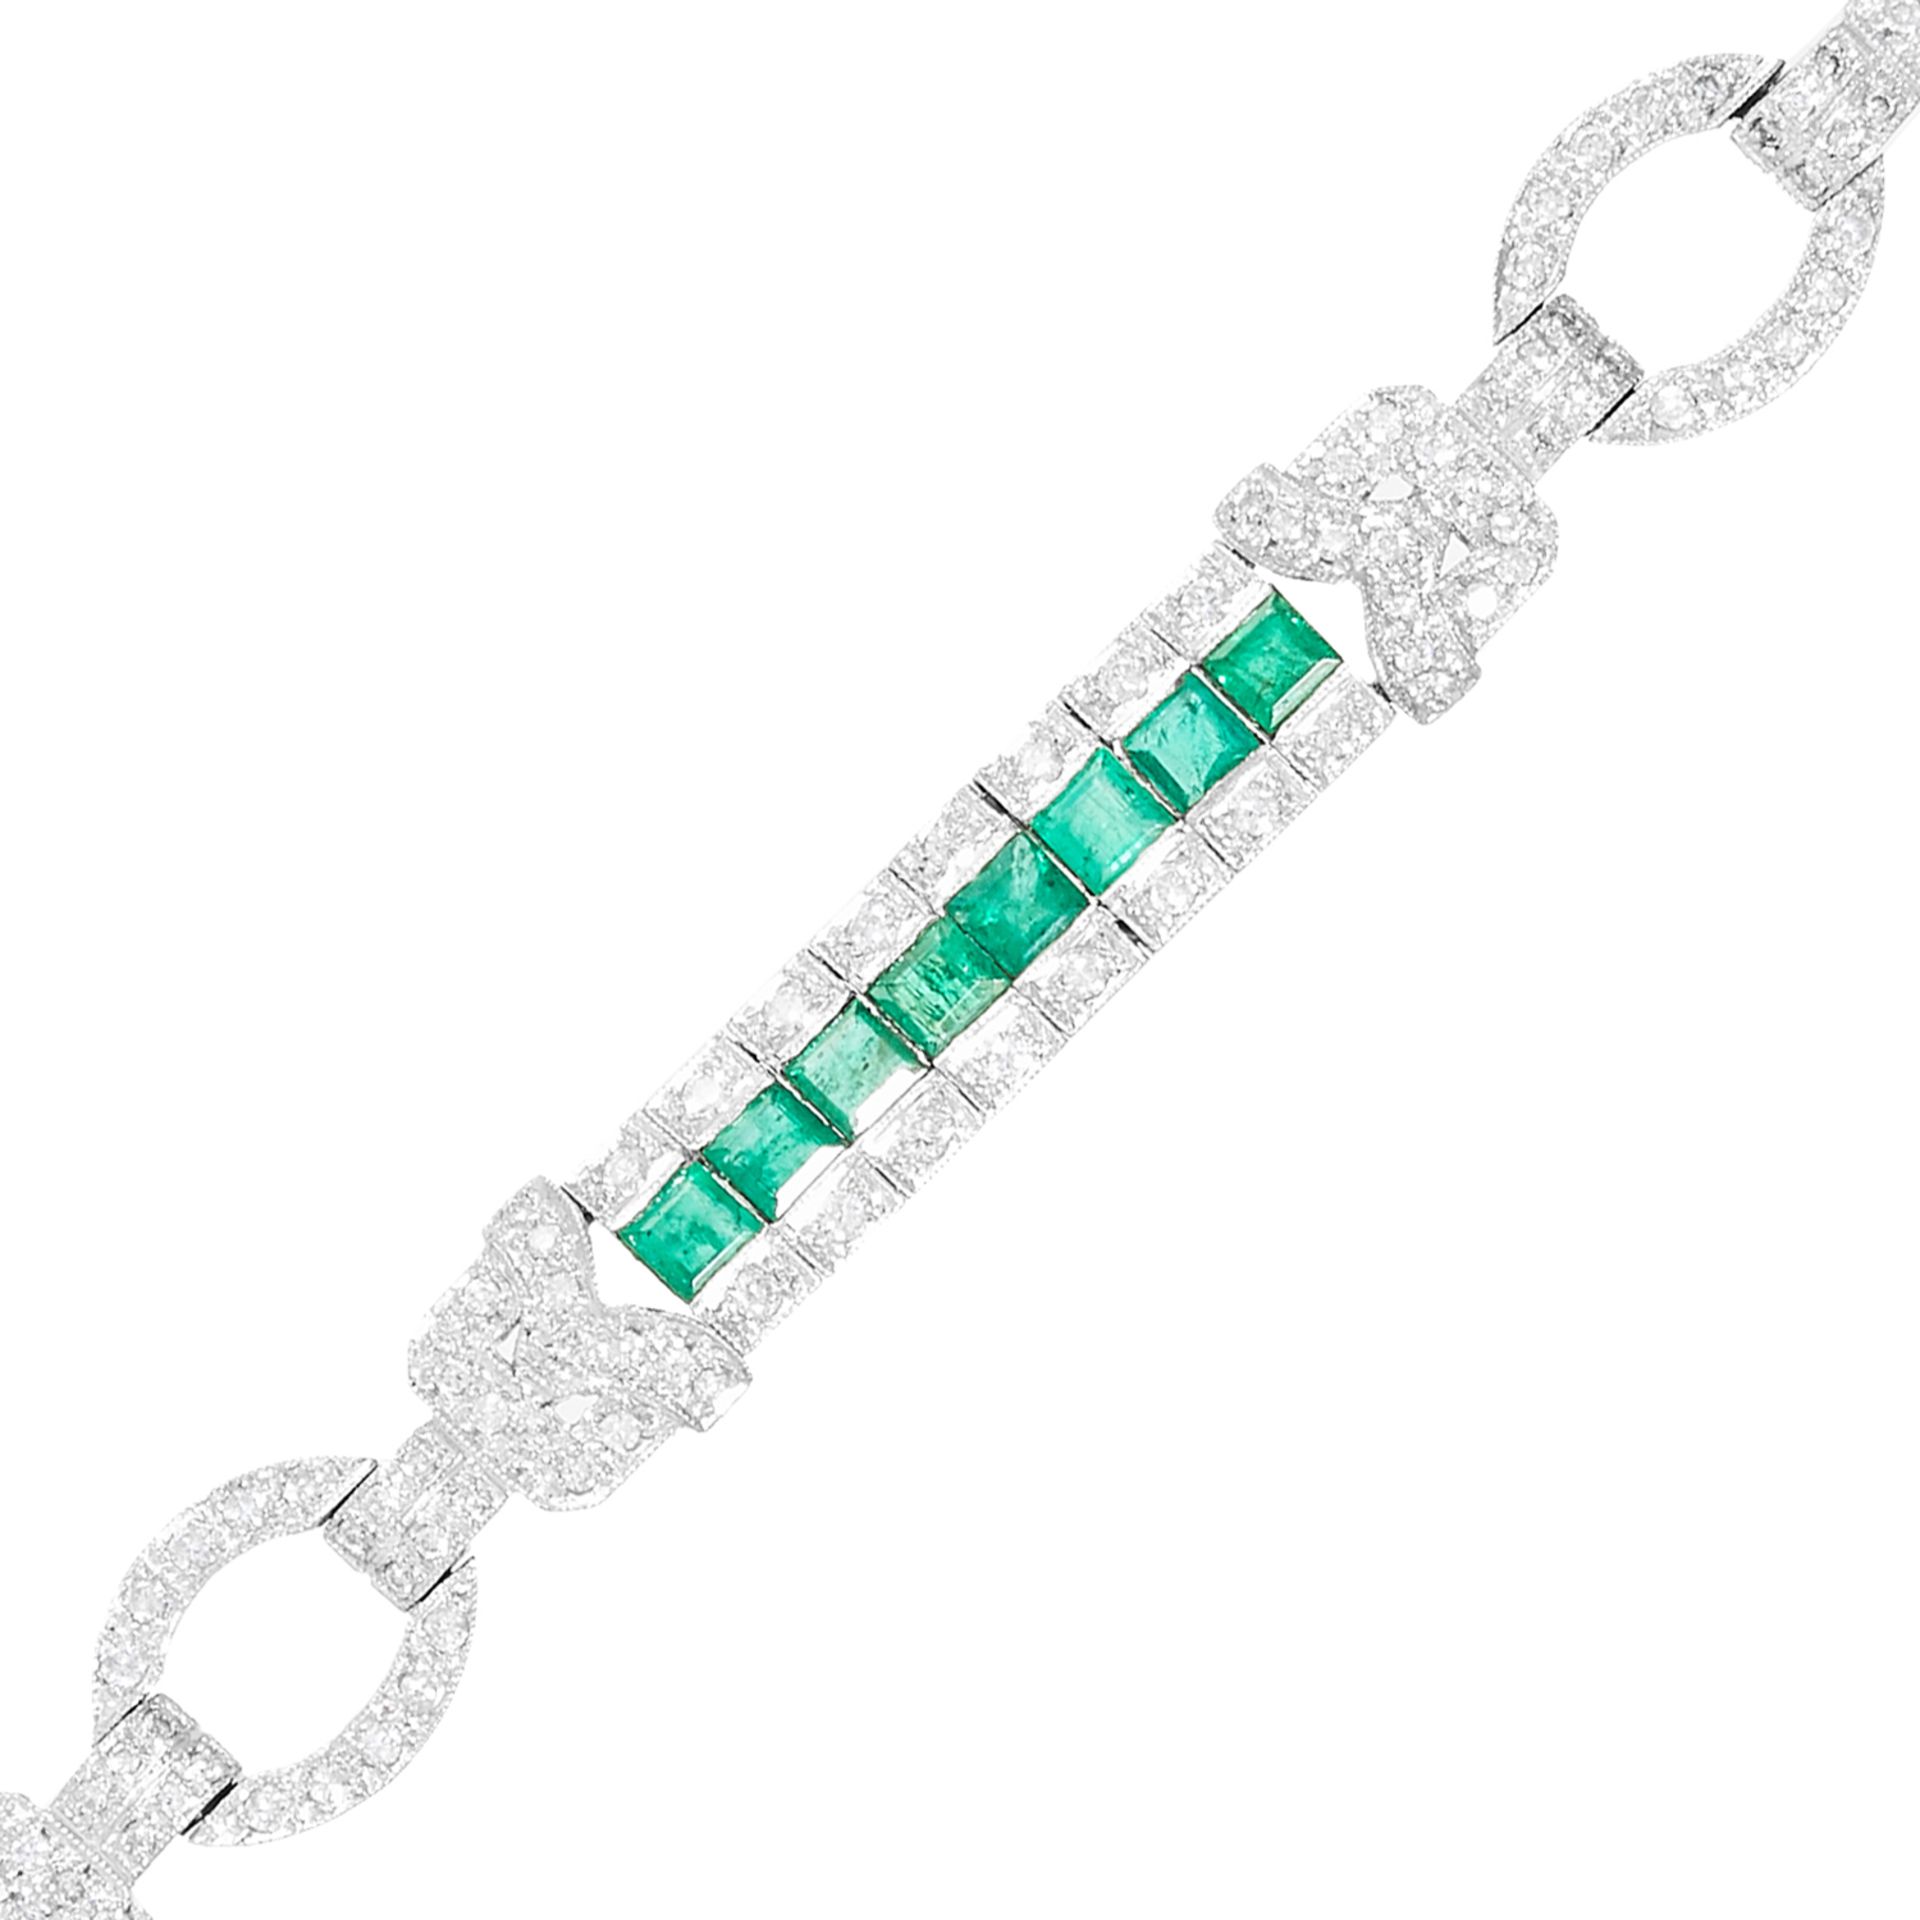 AN ANTIQUE EMERALD AND DIAMOND BRACELET in white gold or platinum, comprising three emerald and - Image 2 of 2